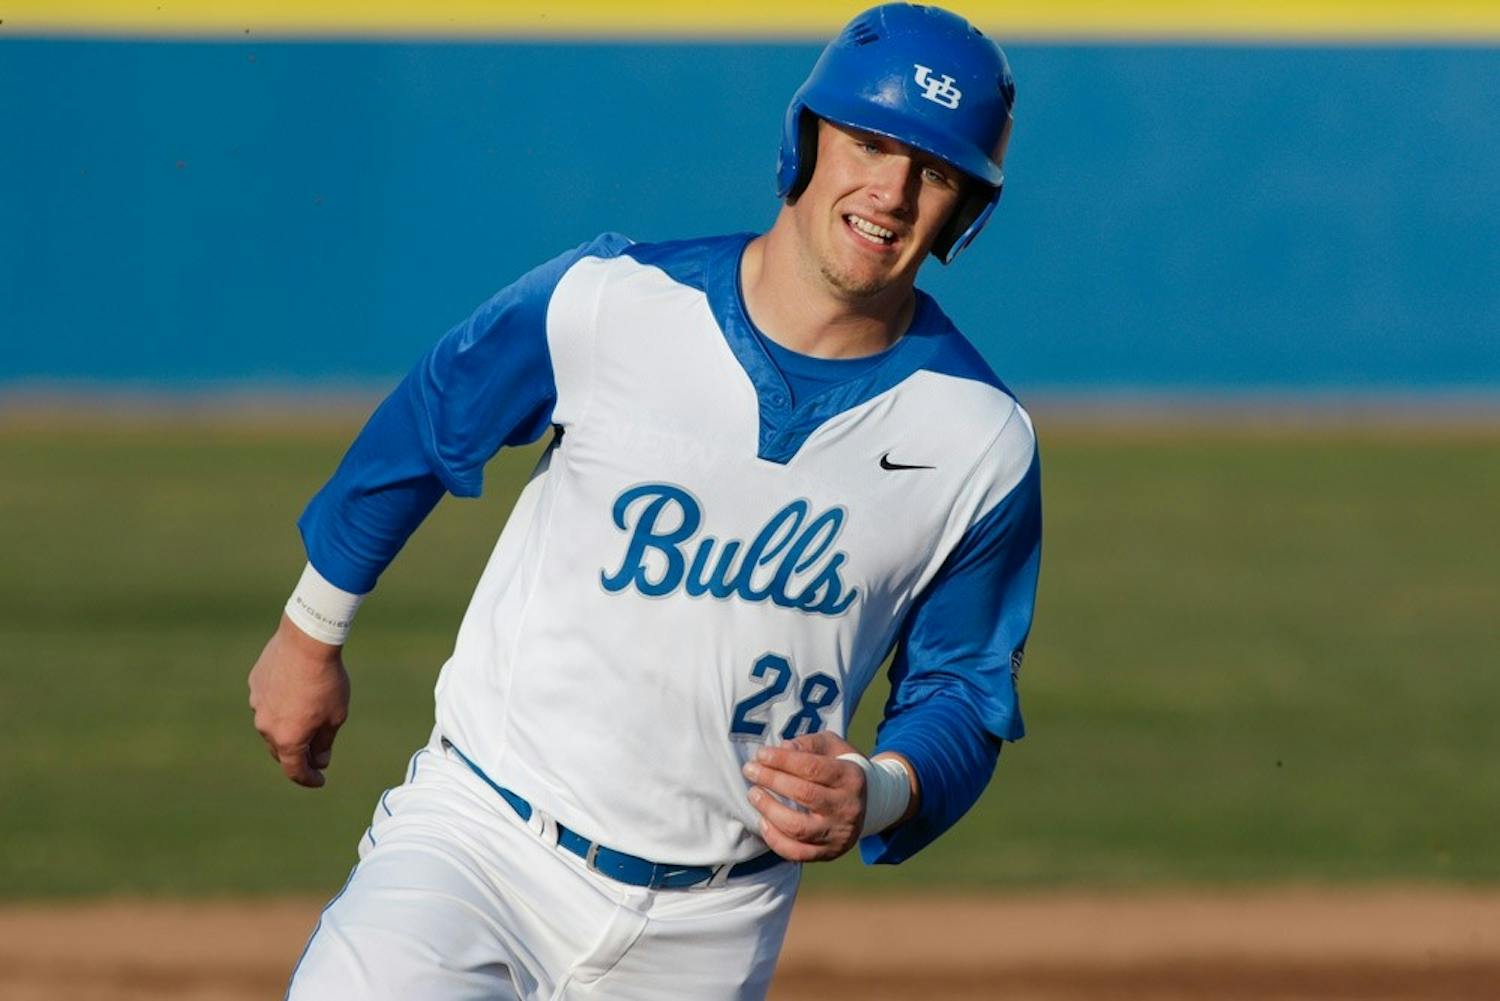 Junior outfielder Vinny Mallaro rounds the bases in a game last season. The Bulls are looking to have a successful Mid-American Conference run and return to the MAC Tournament.&nbsp;